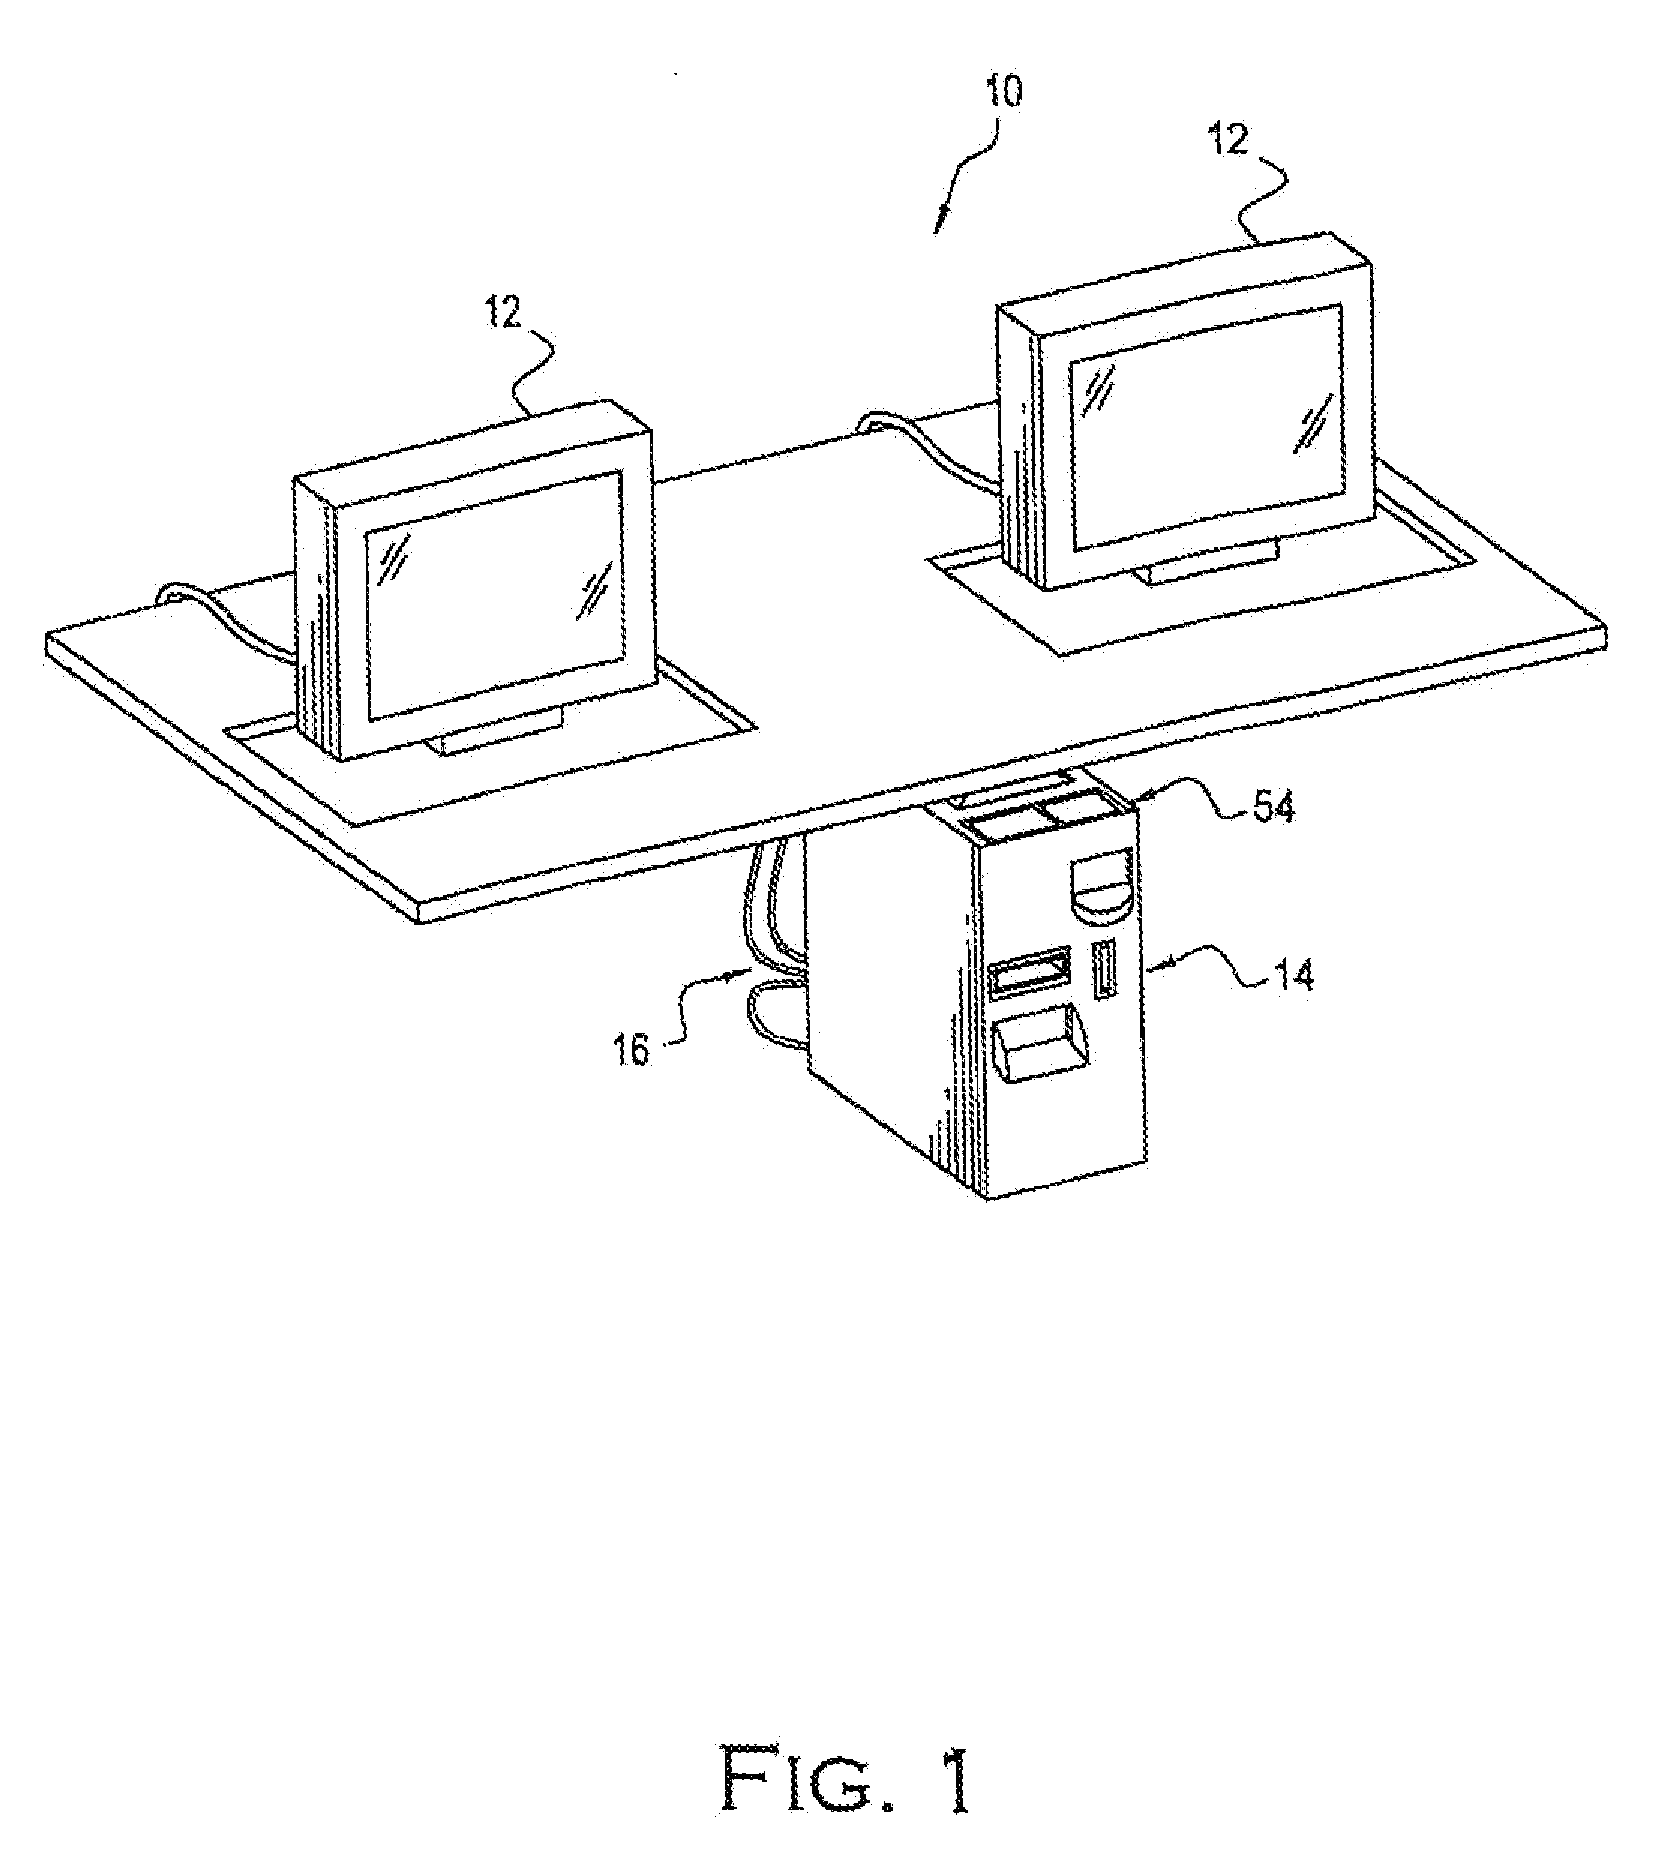 Currency changer device for use with a point of sale terminal